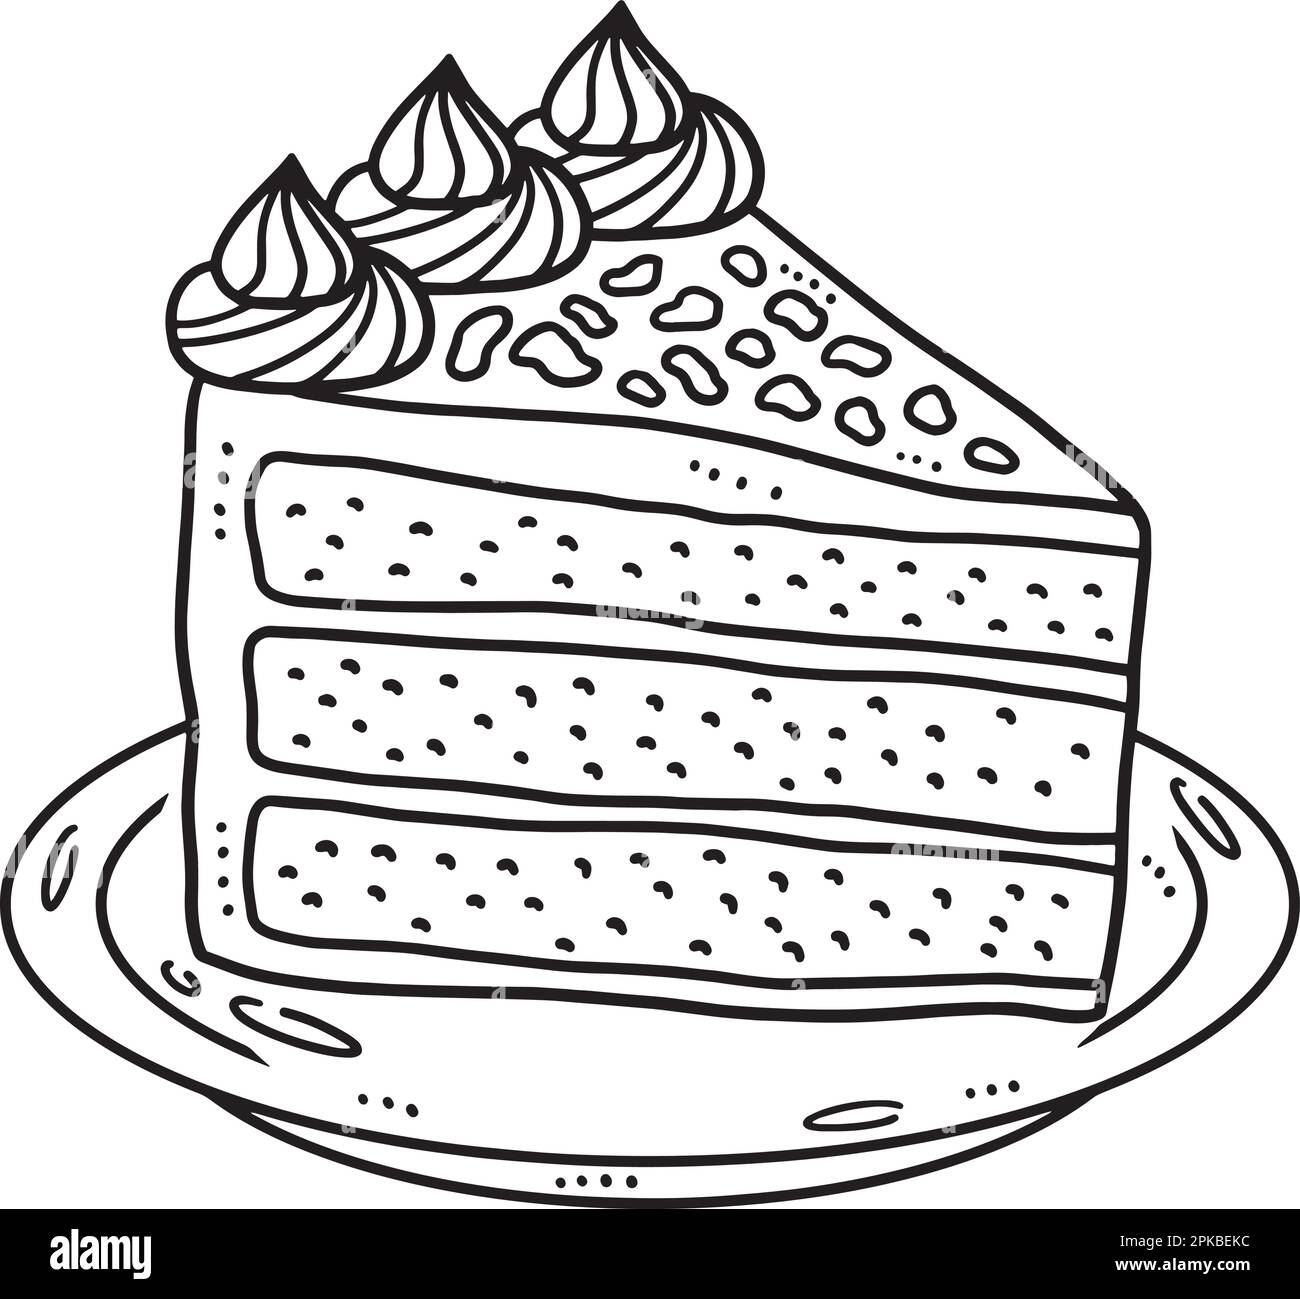 Slice cake isolated coloring page for kids stock vector image art